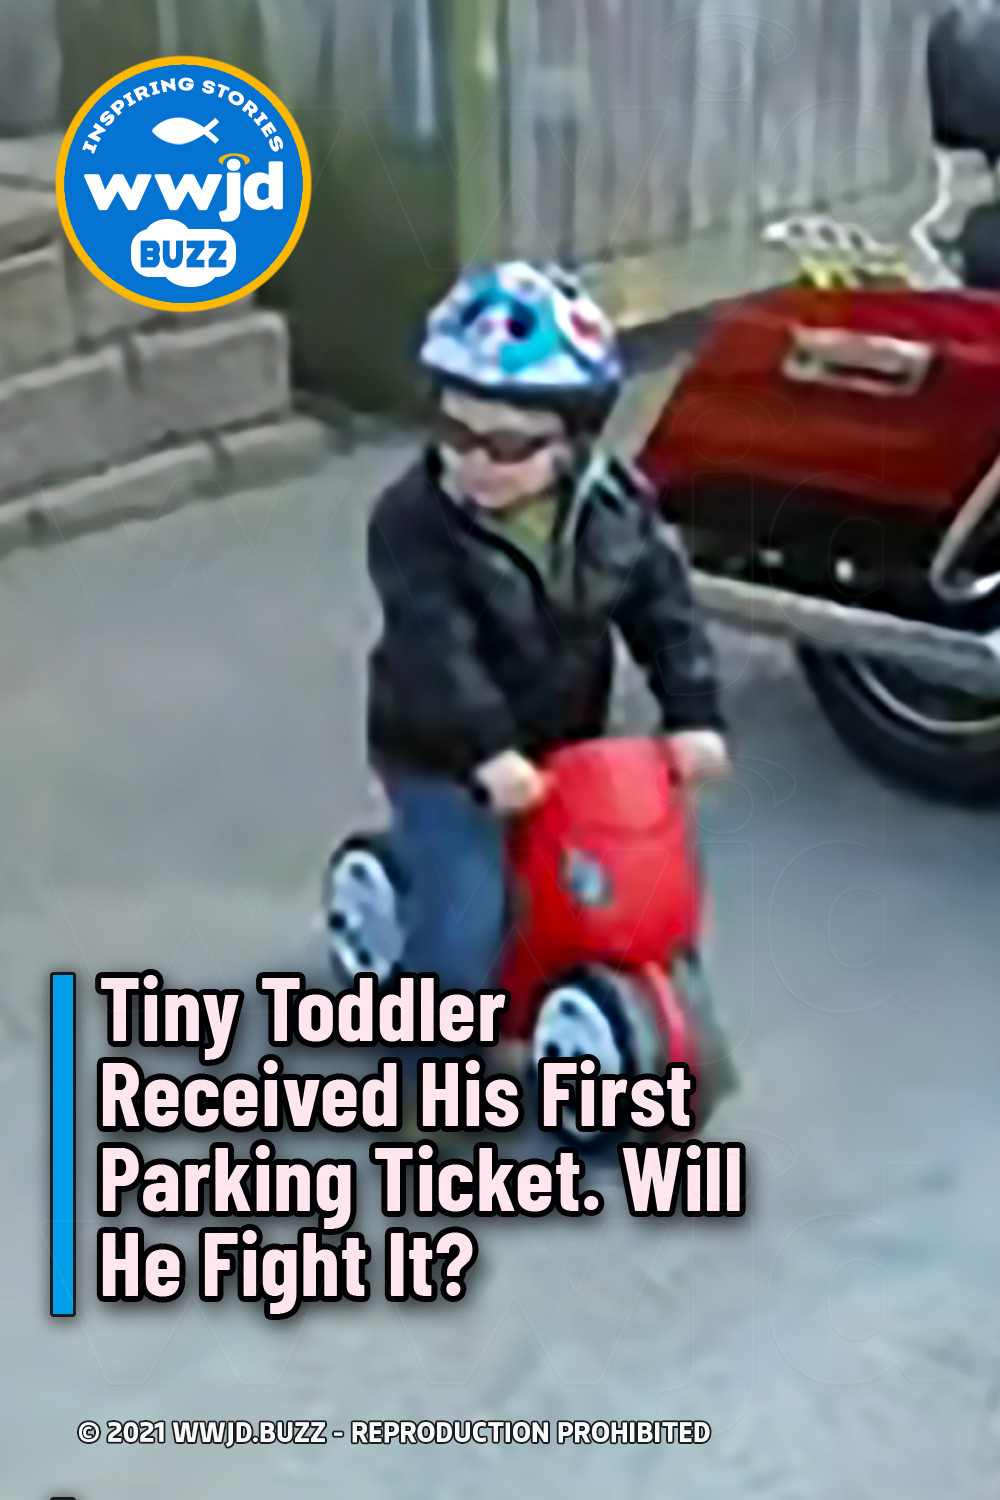 Tiny Toddler Received His First Parking Ticket. Will He Fight It?